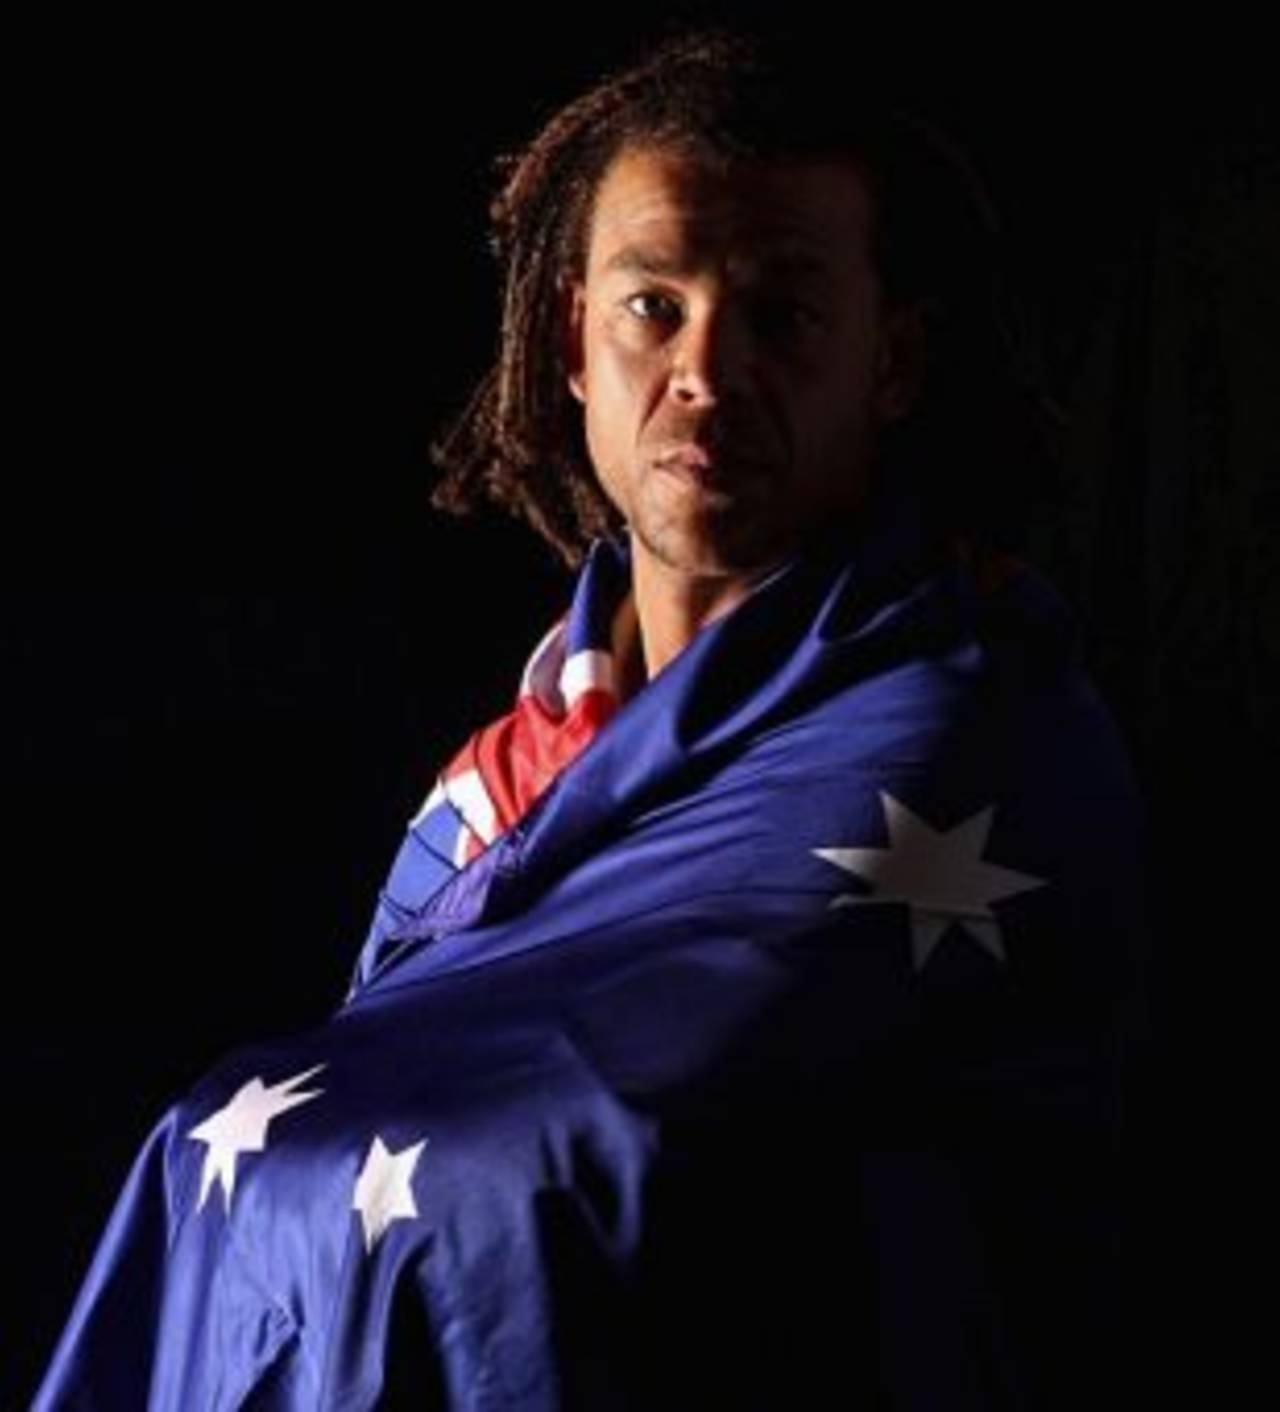 Andrew Symonds poses with the Australian flag, Brisbane, August 27, 2008